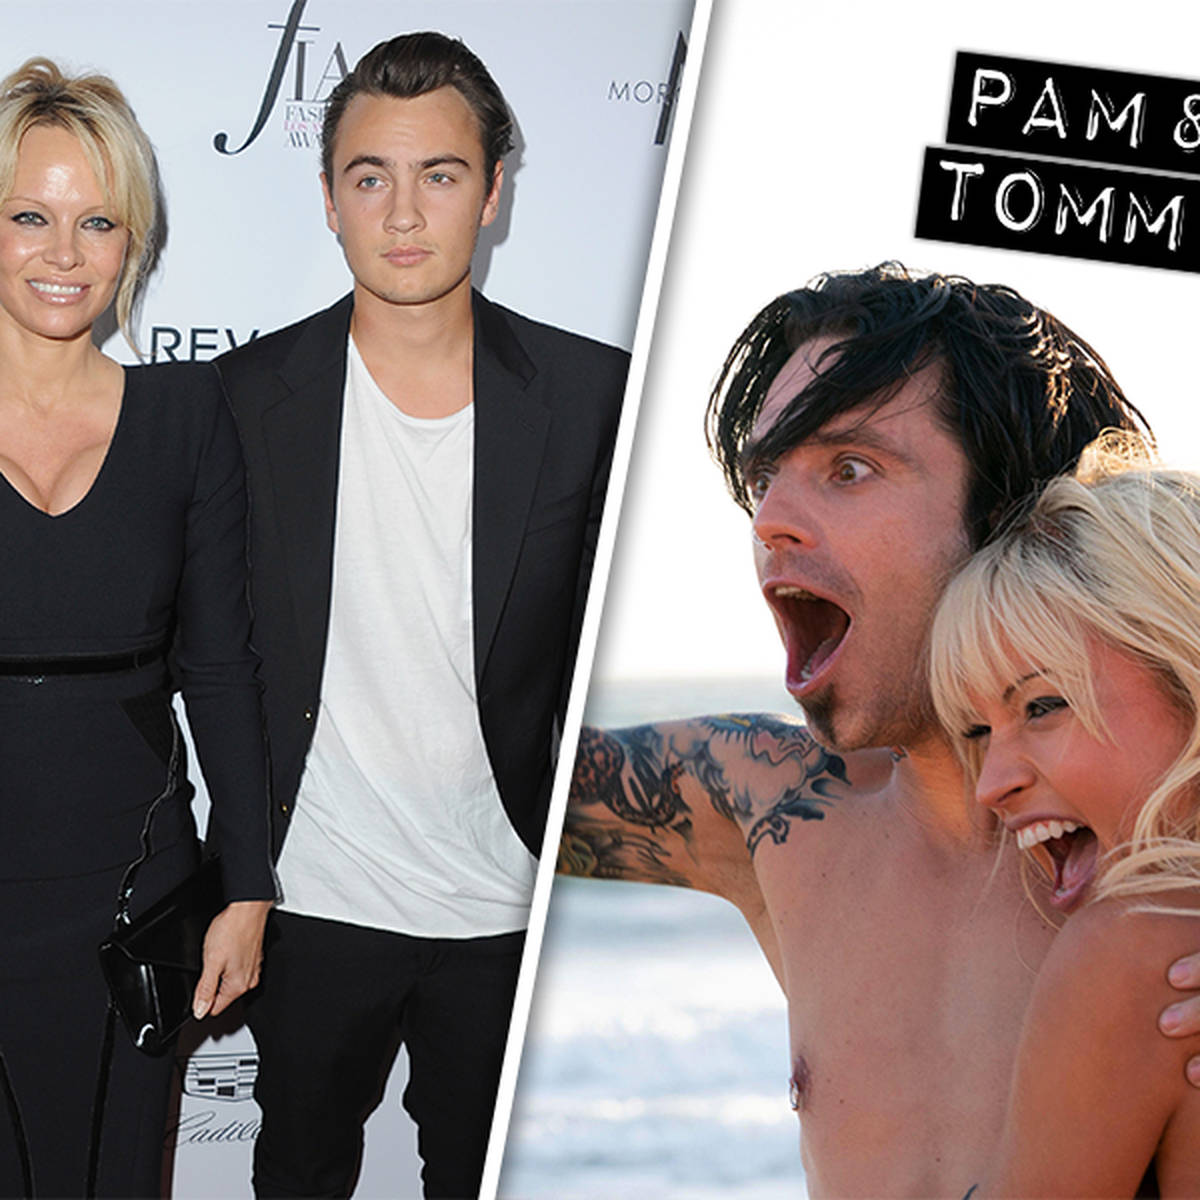 Where Are Pamela Anderson And Tommy Lee's Kids Now? - Capital